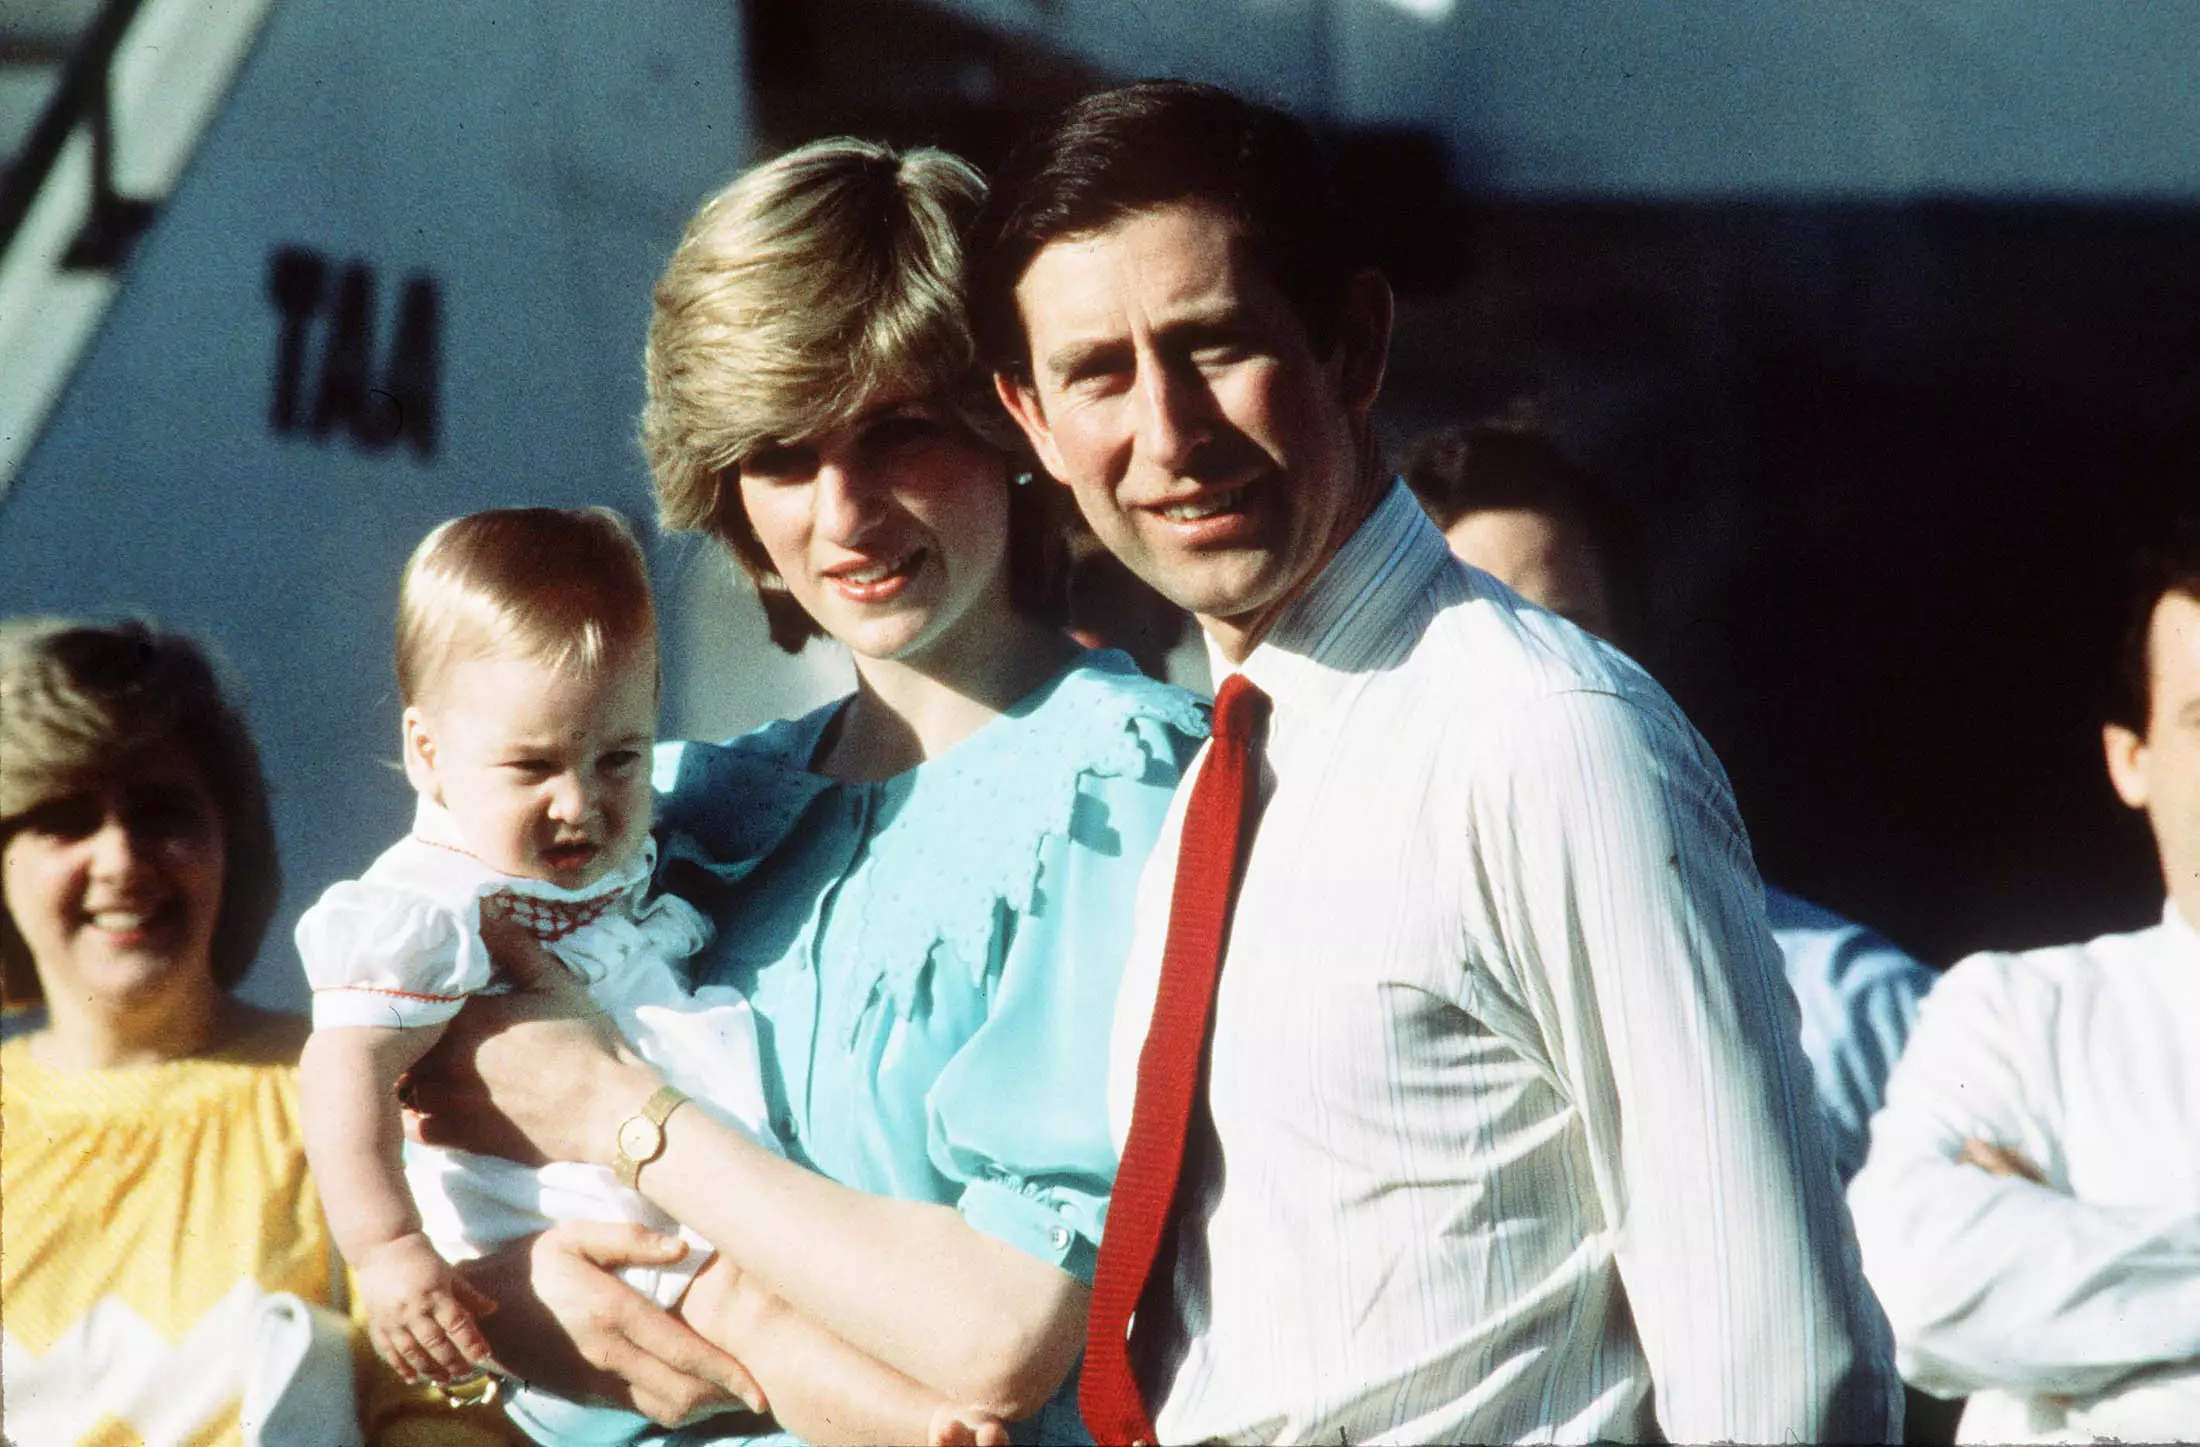 Princess Diana and Prince Charles with Prince William in Australia (